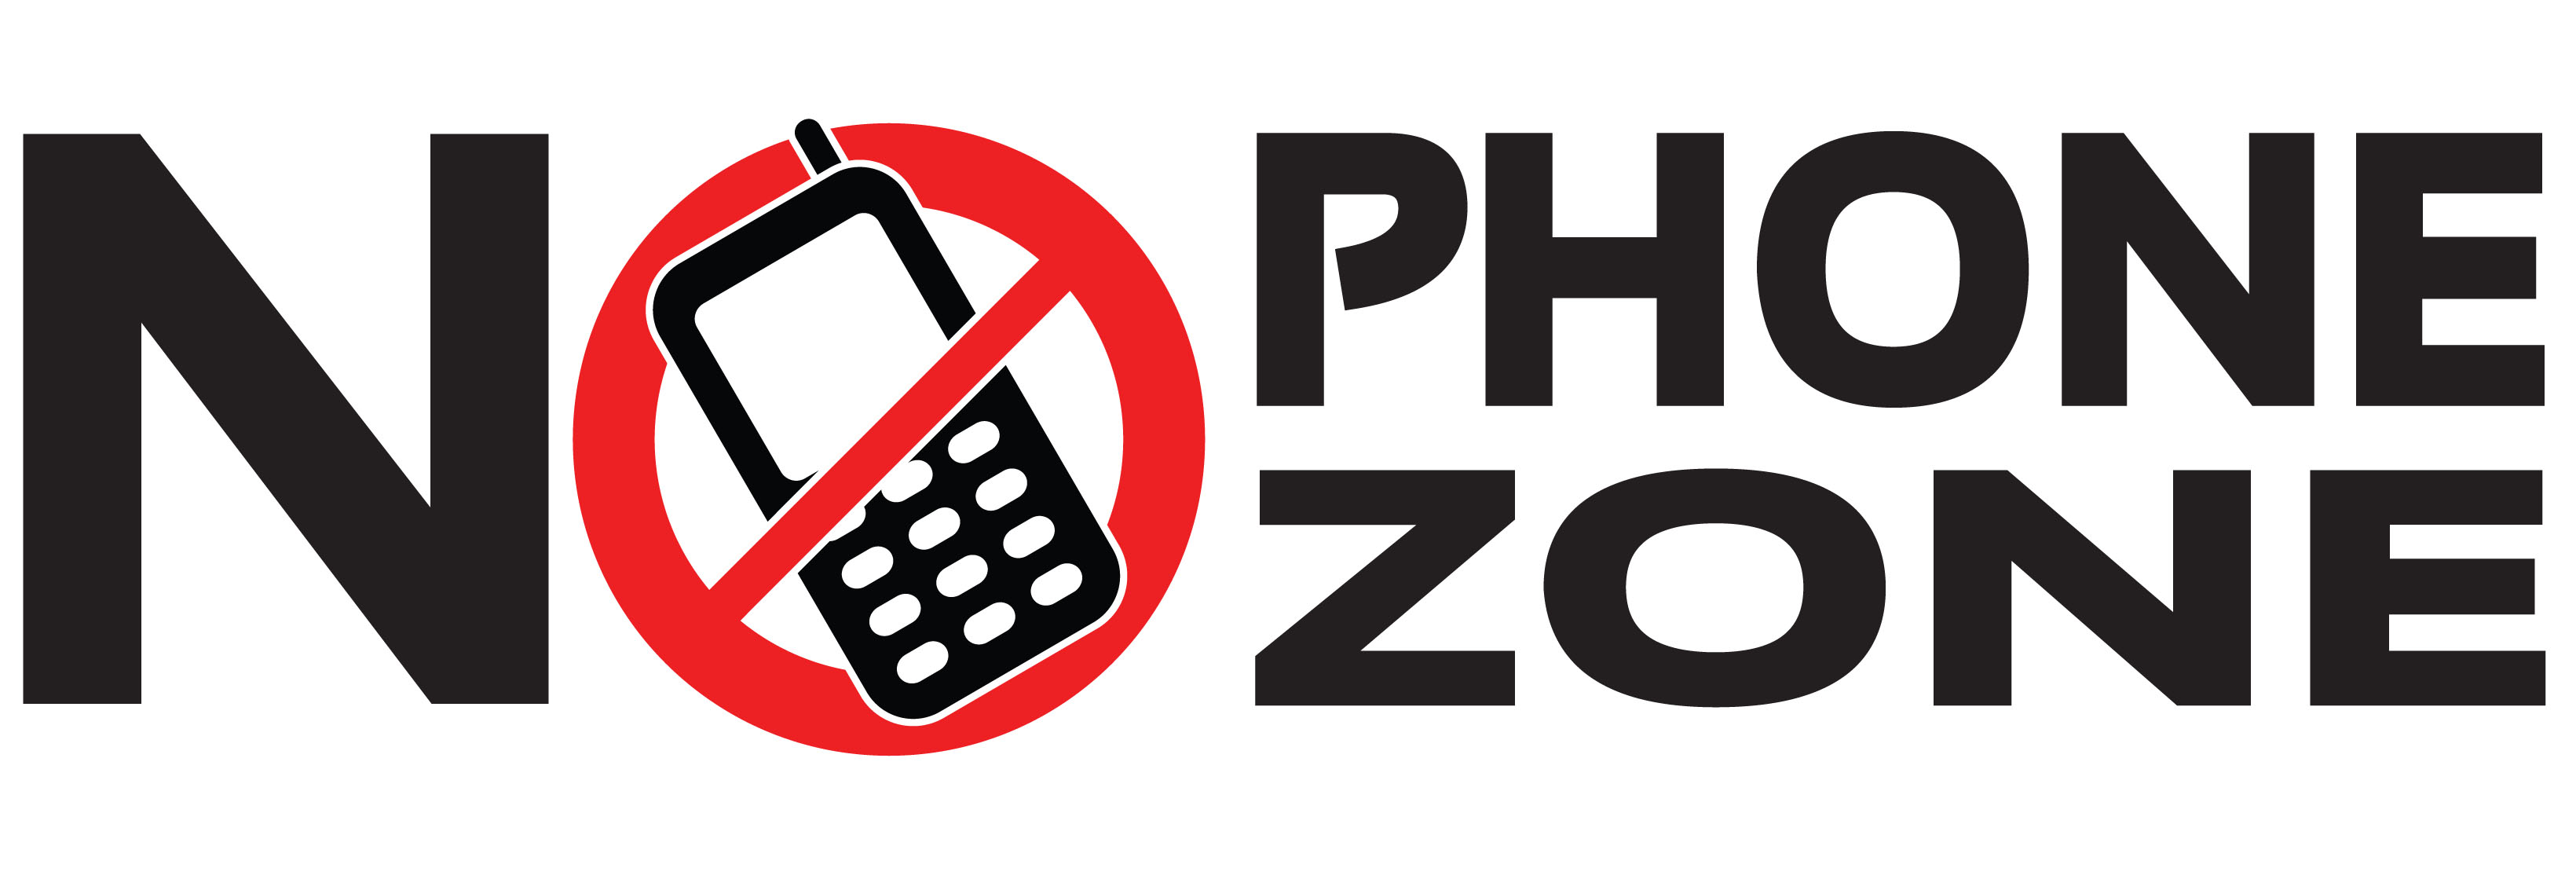 no-mobile-phones-sign-free-download-clipart-best